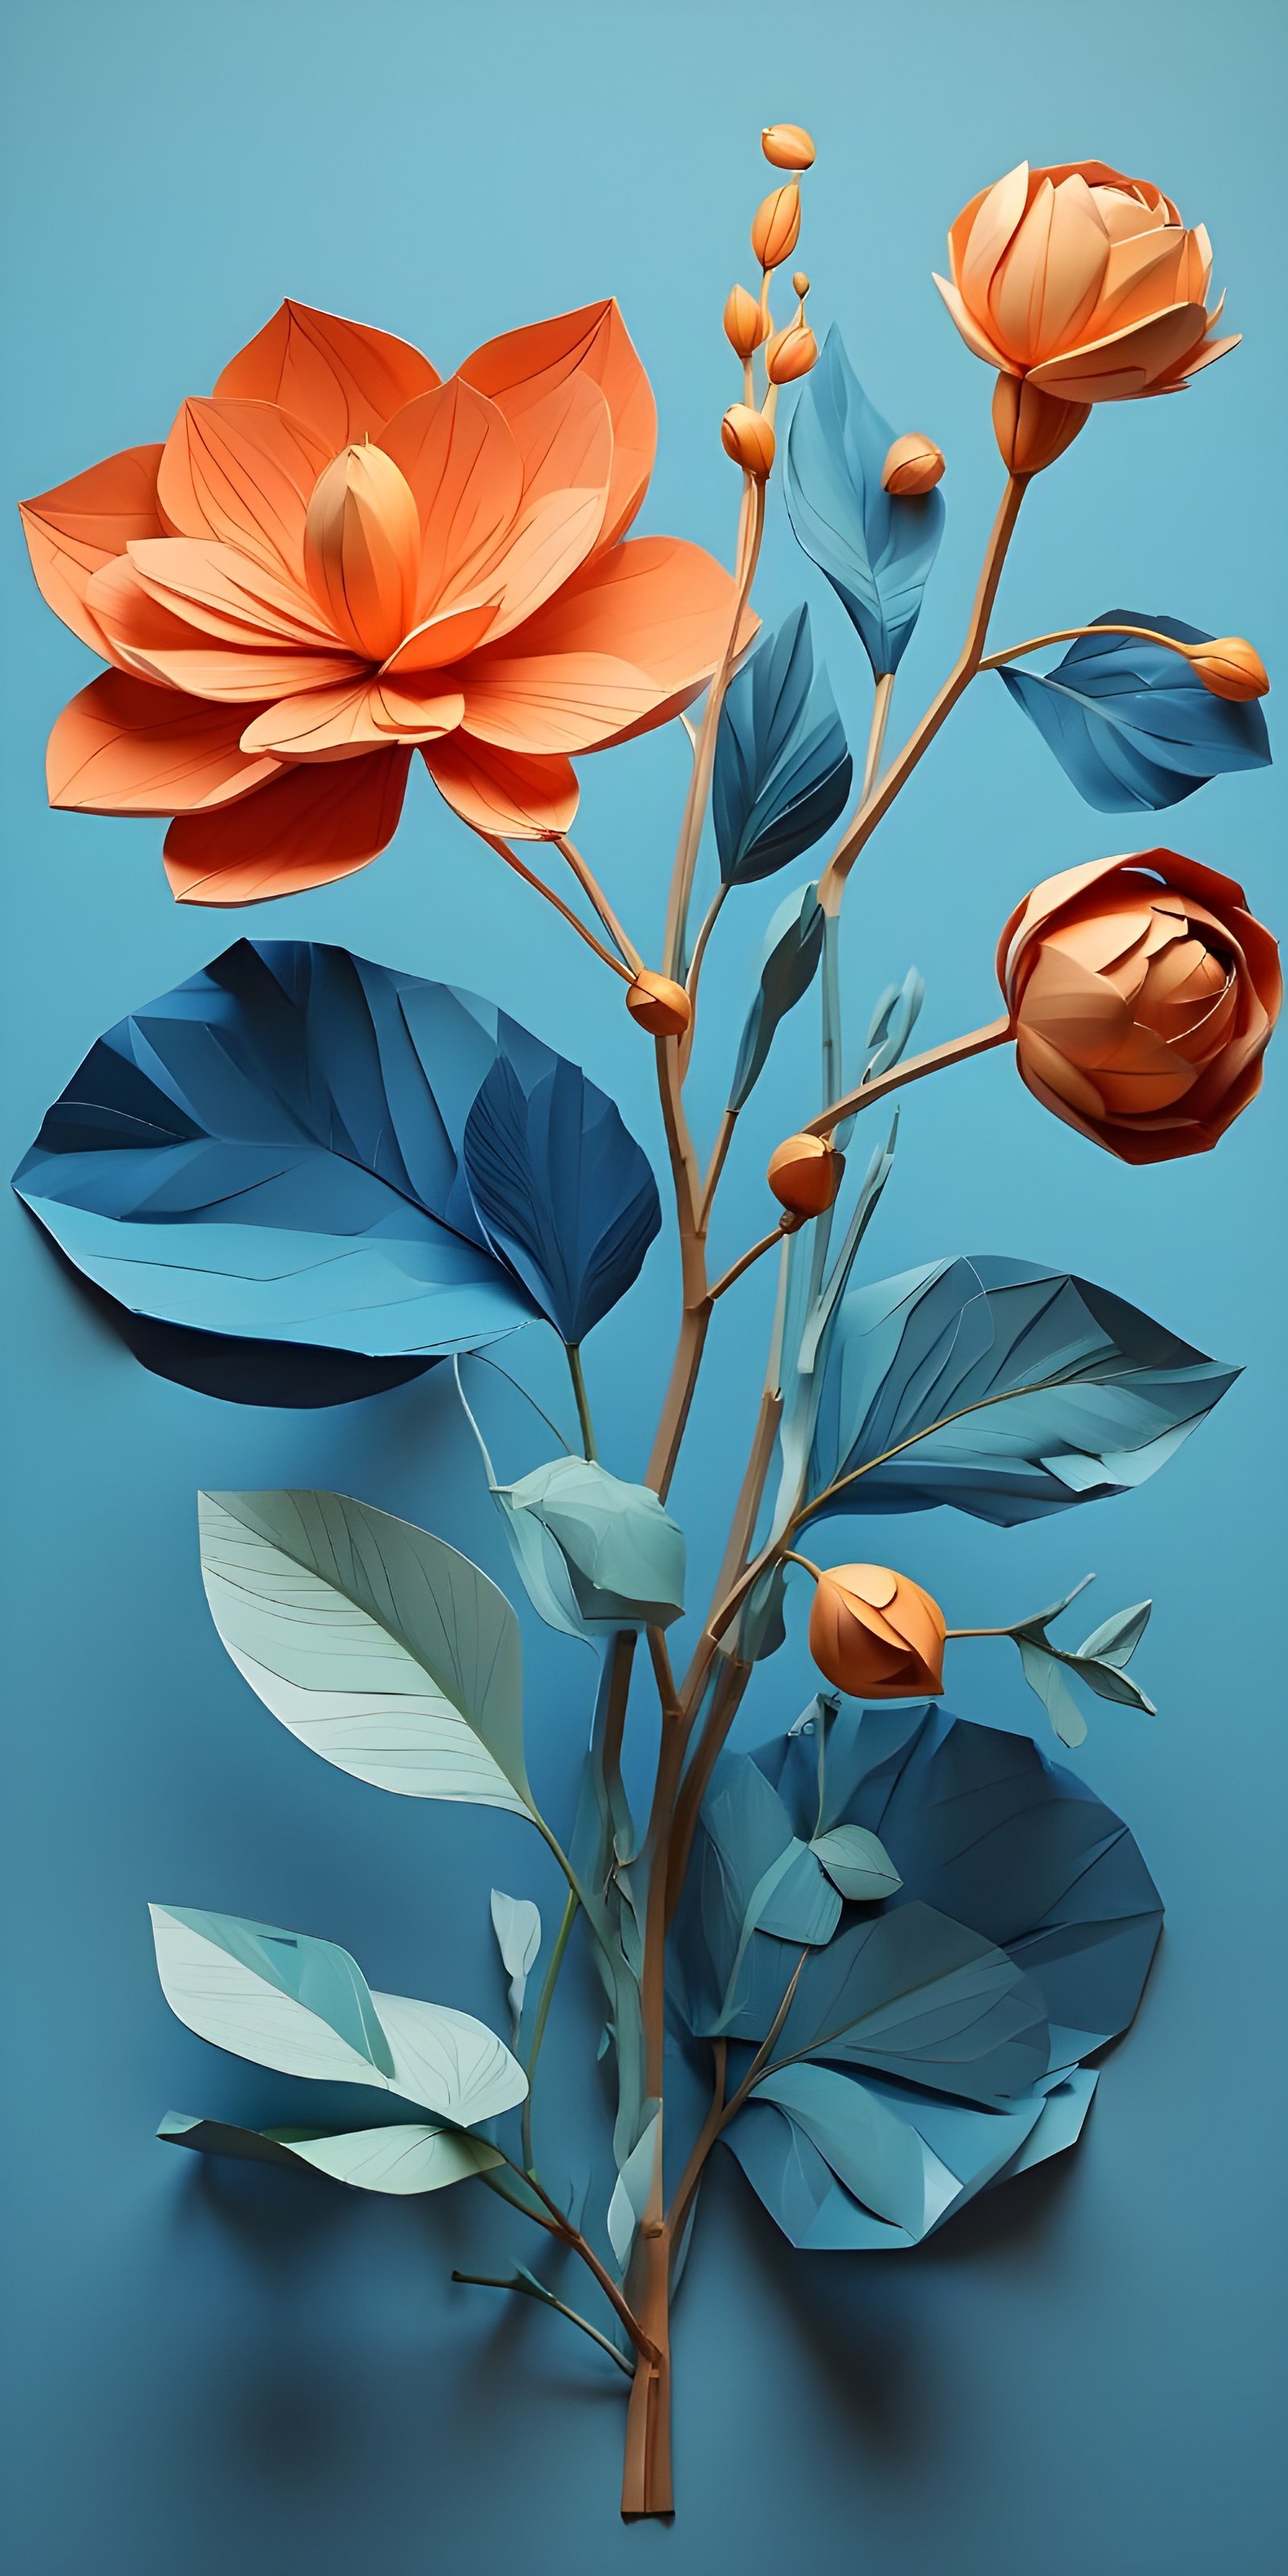 Artisitic Plant Flower Orange and Blue Phone Wallpapers